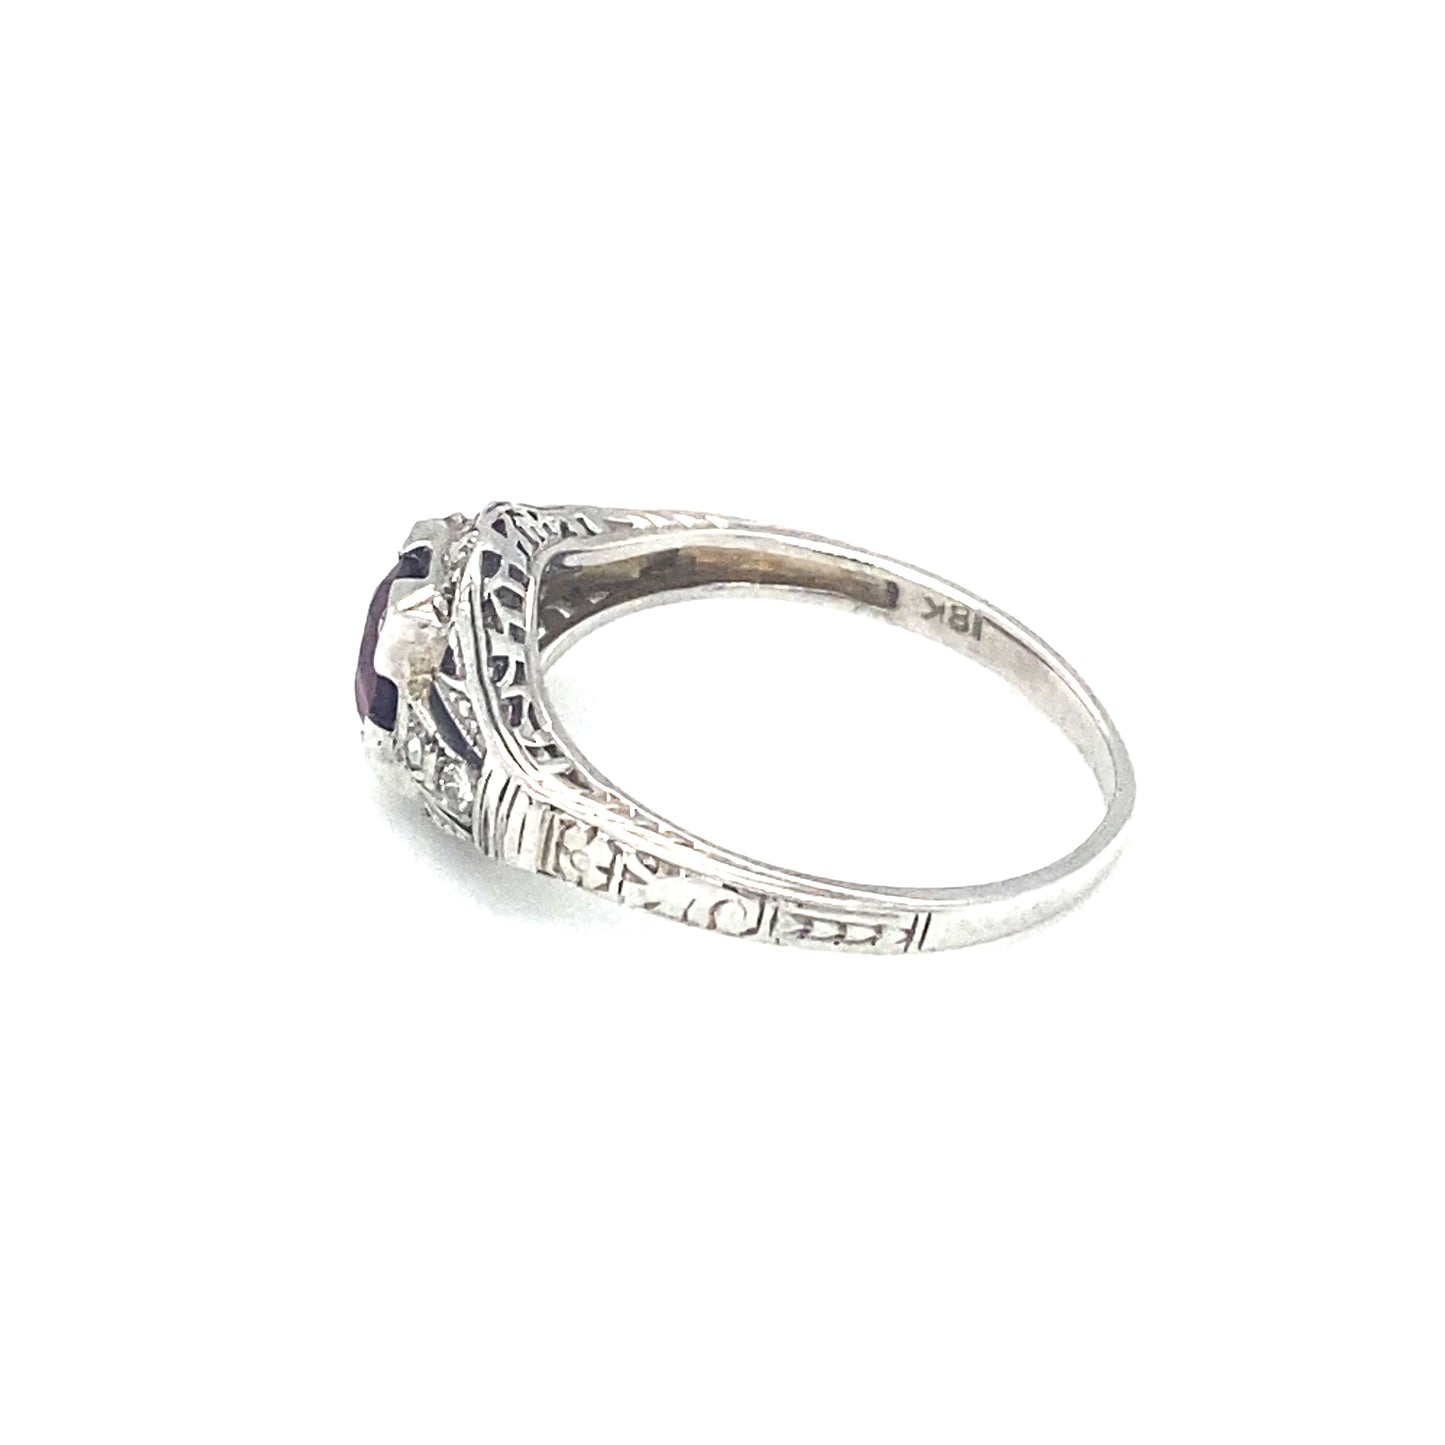 Circa 1920s Art Deco Amethyst and Diamond Ring in 18K White Gold